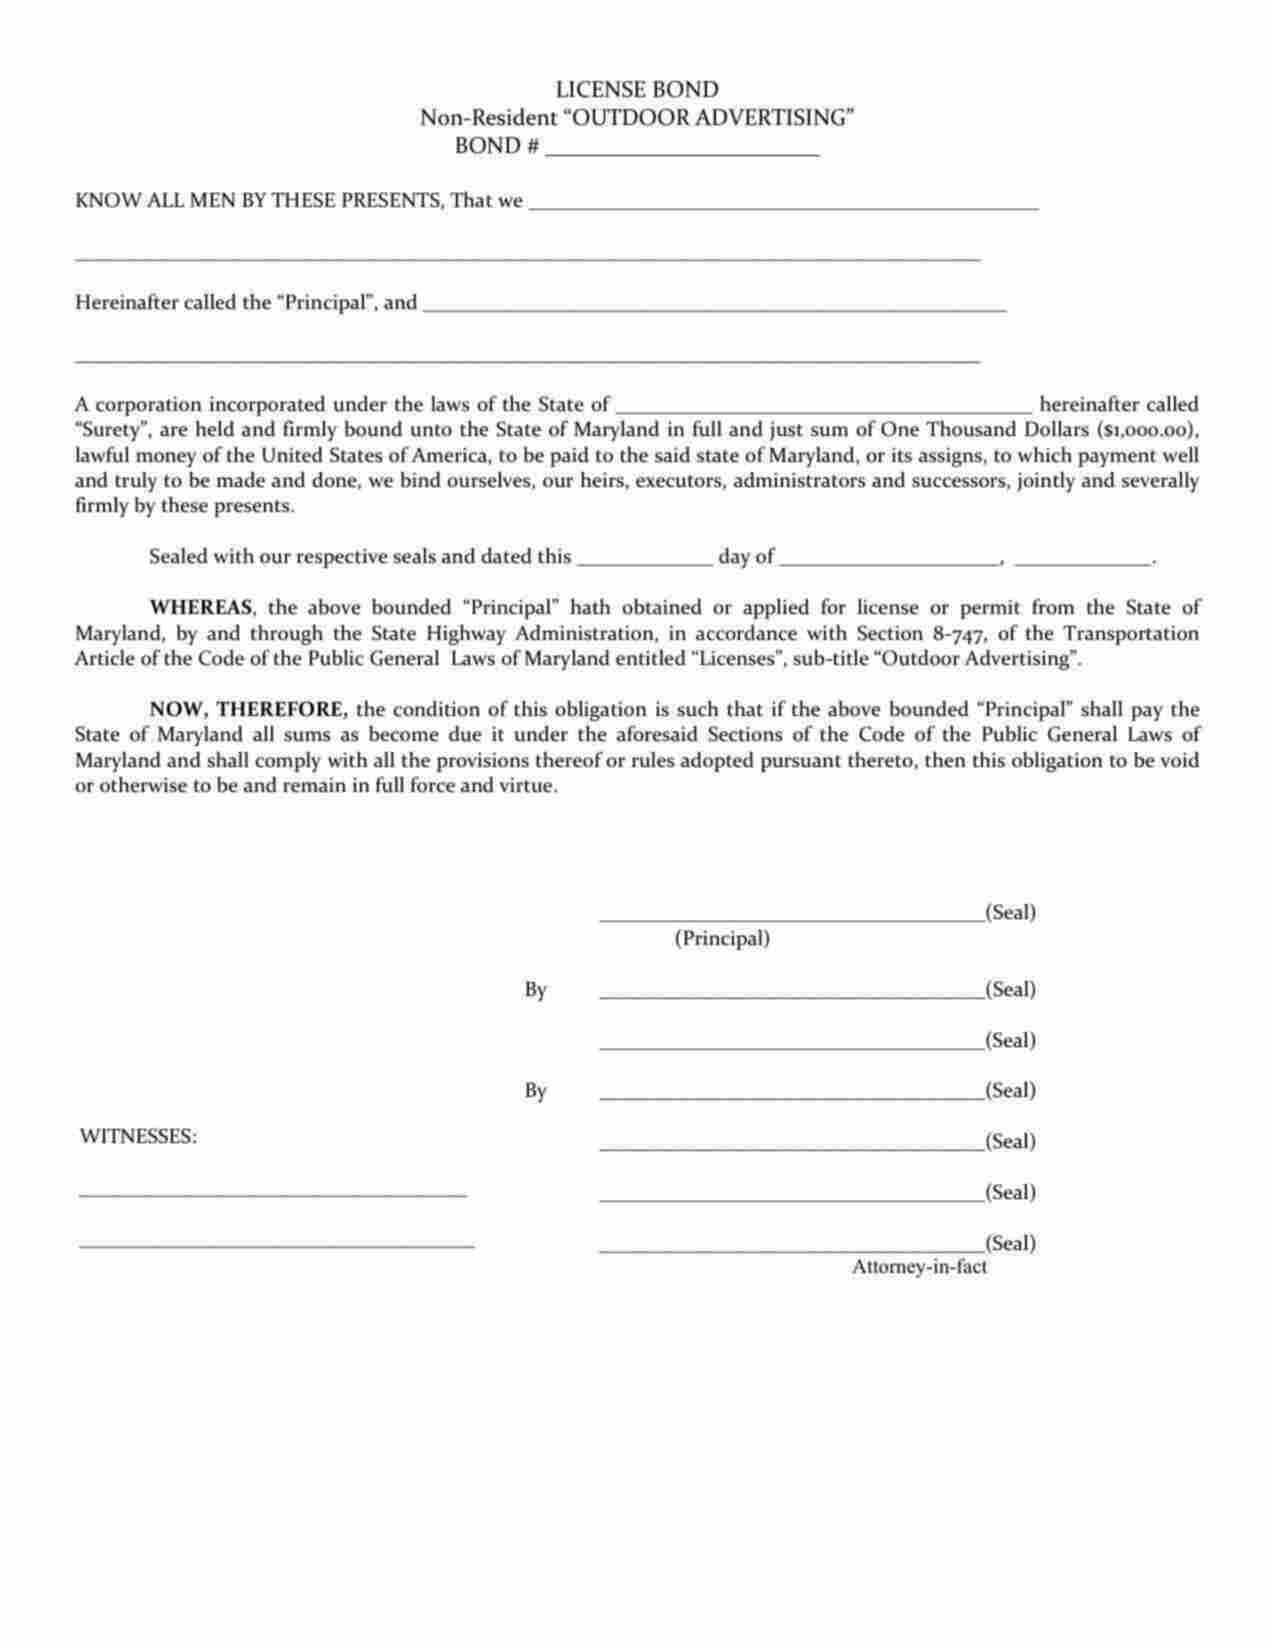 Maryland Non-Resident Outdoor Advertising Bond Form